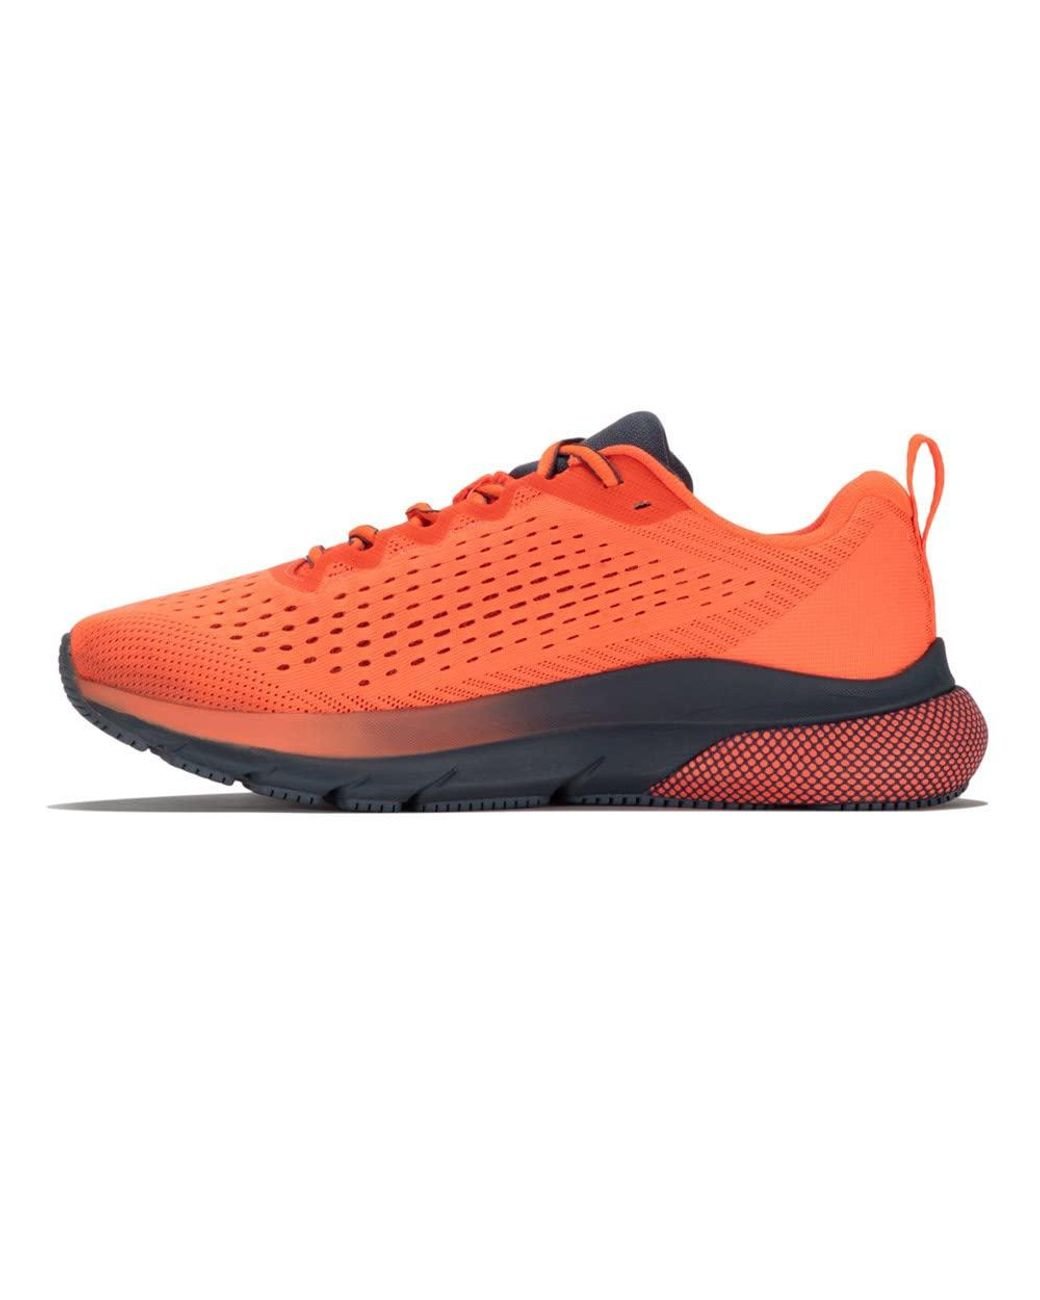 Under Armour Ua Hovr Turbulence Running Shoes Technical Performance in ...